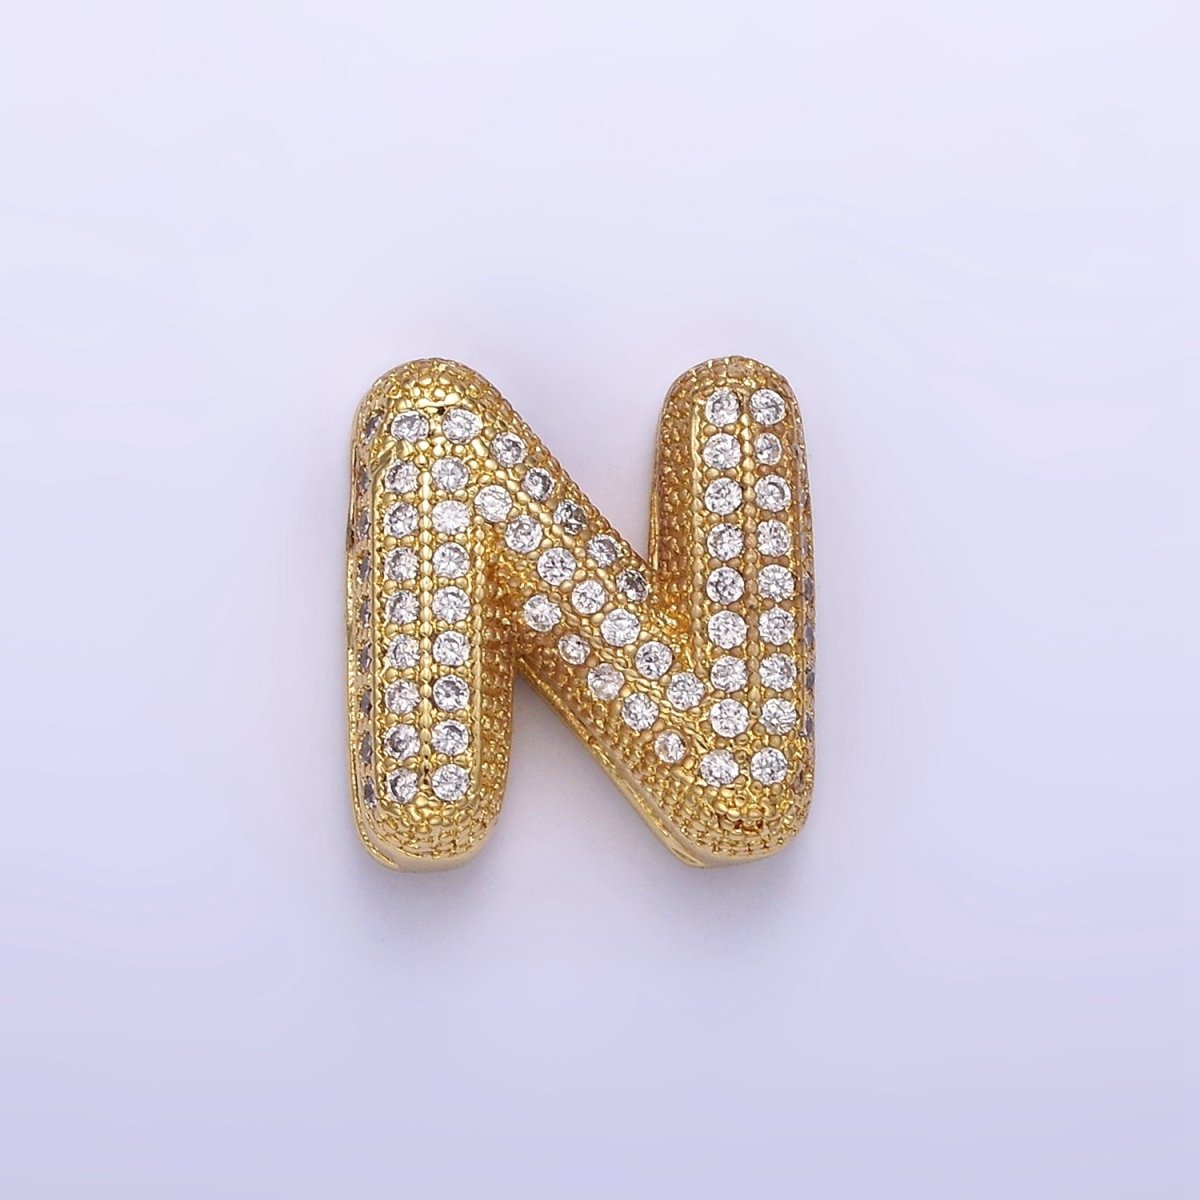 14K Gold Filled 15mm Micro Paved Balloon Bubble Initial Letter Pendant | A1171 - A1183 - DLUXCA